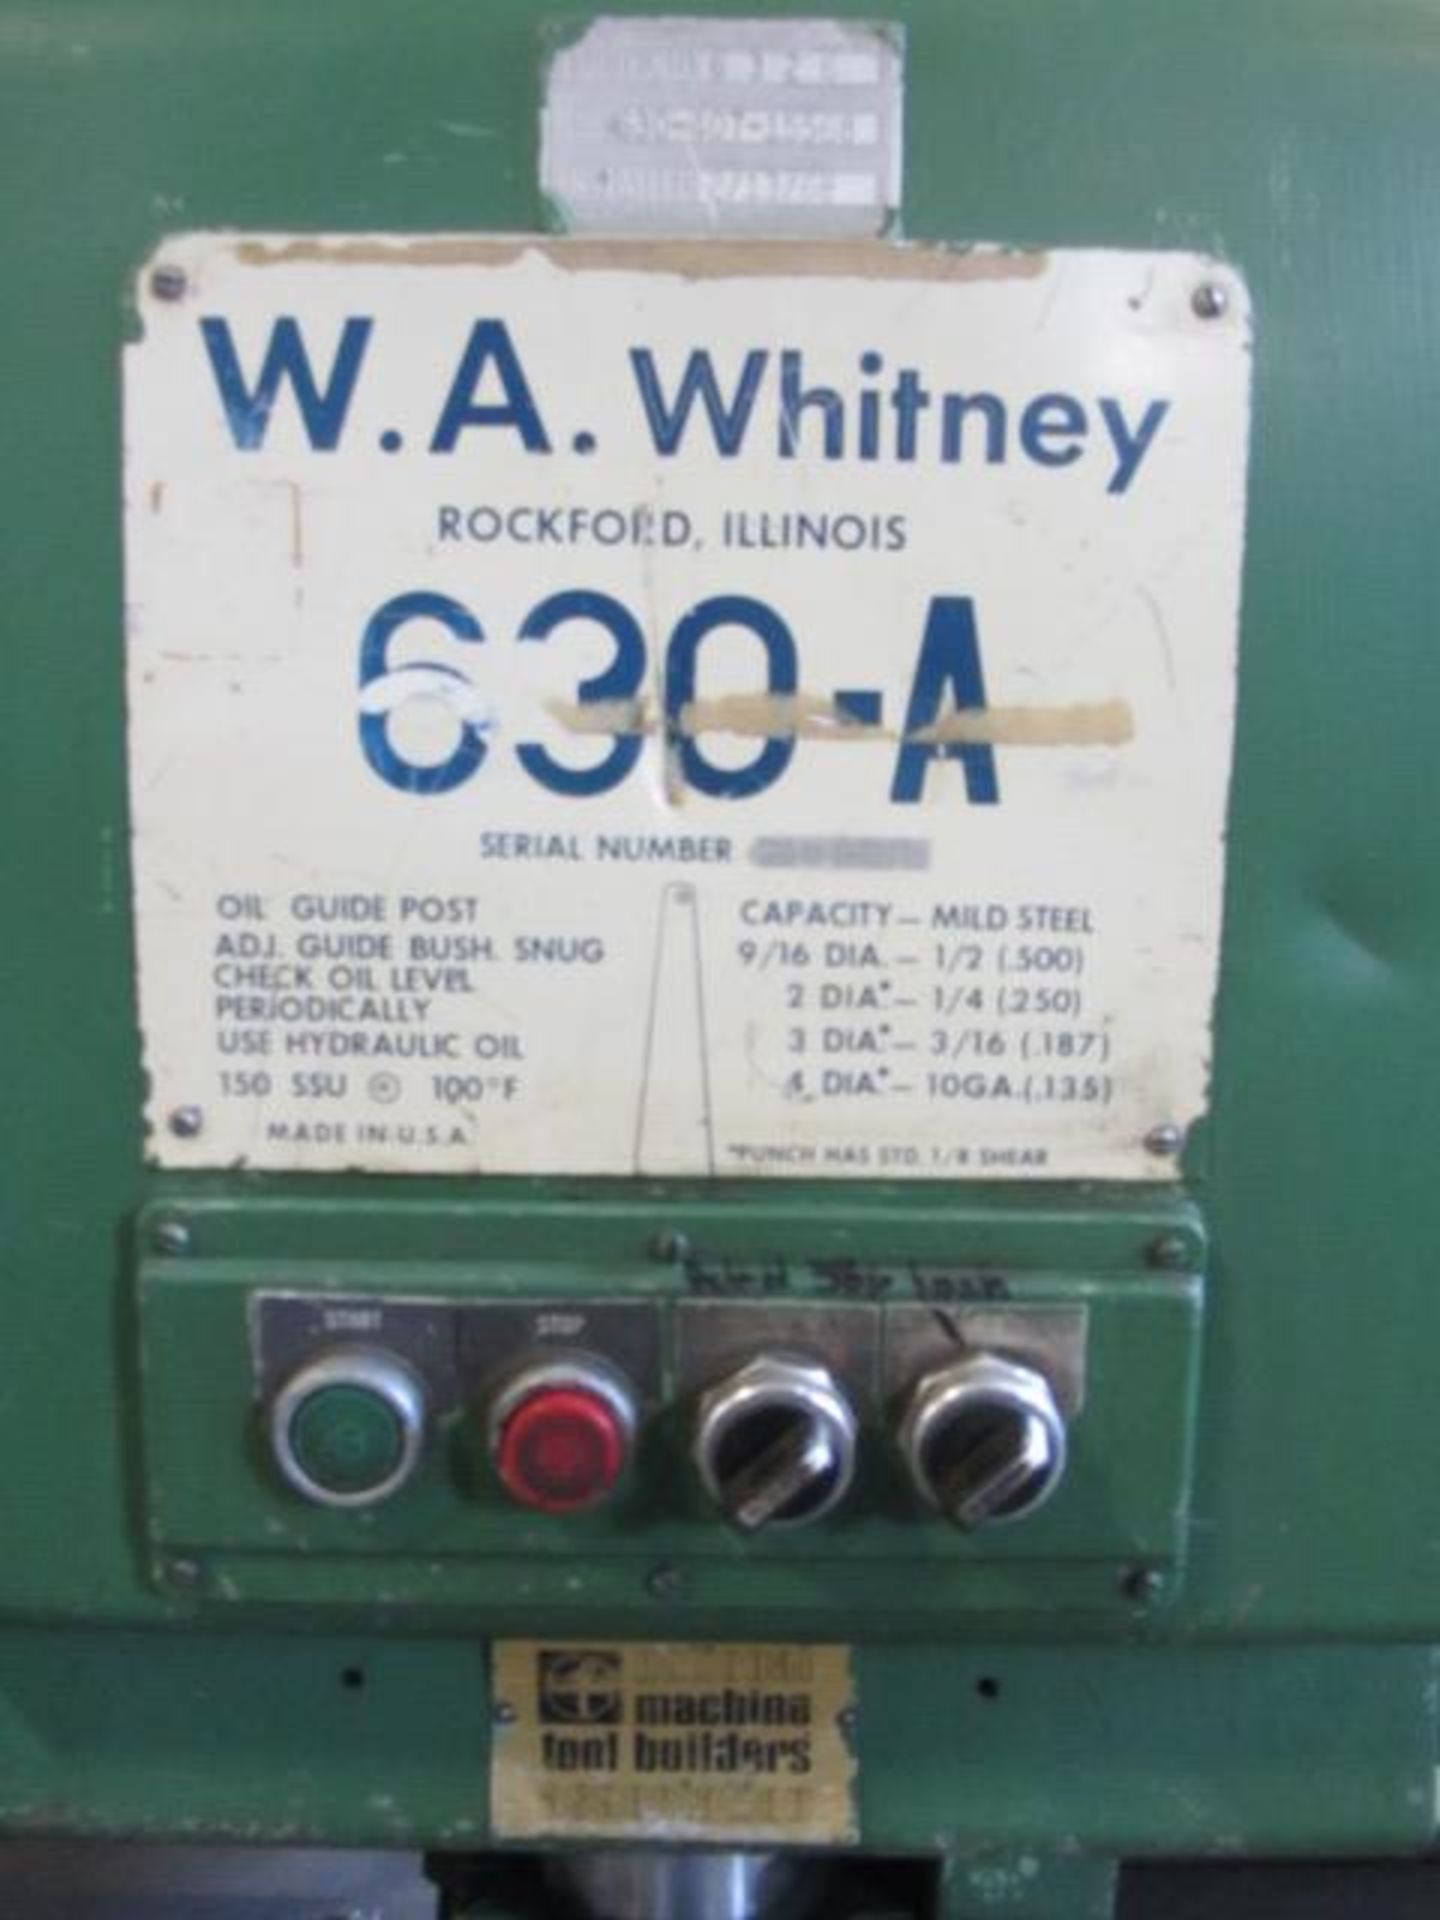 W.A.Whitney 630-A Hydraulic Duplicating Punch, sn:630-407-15568 - Image 5 of 8